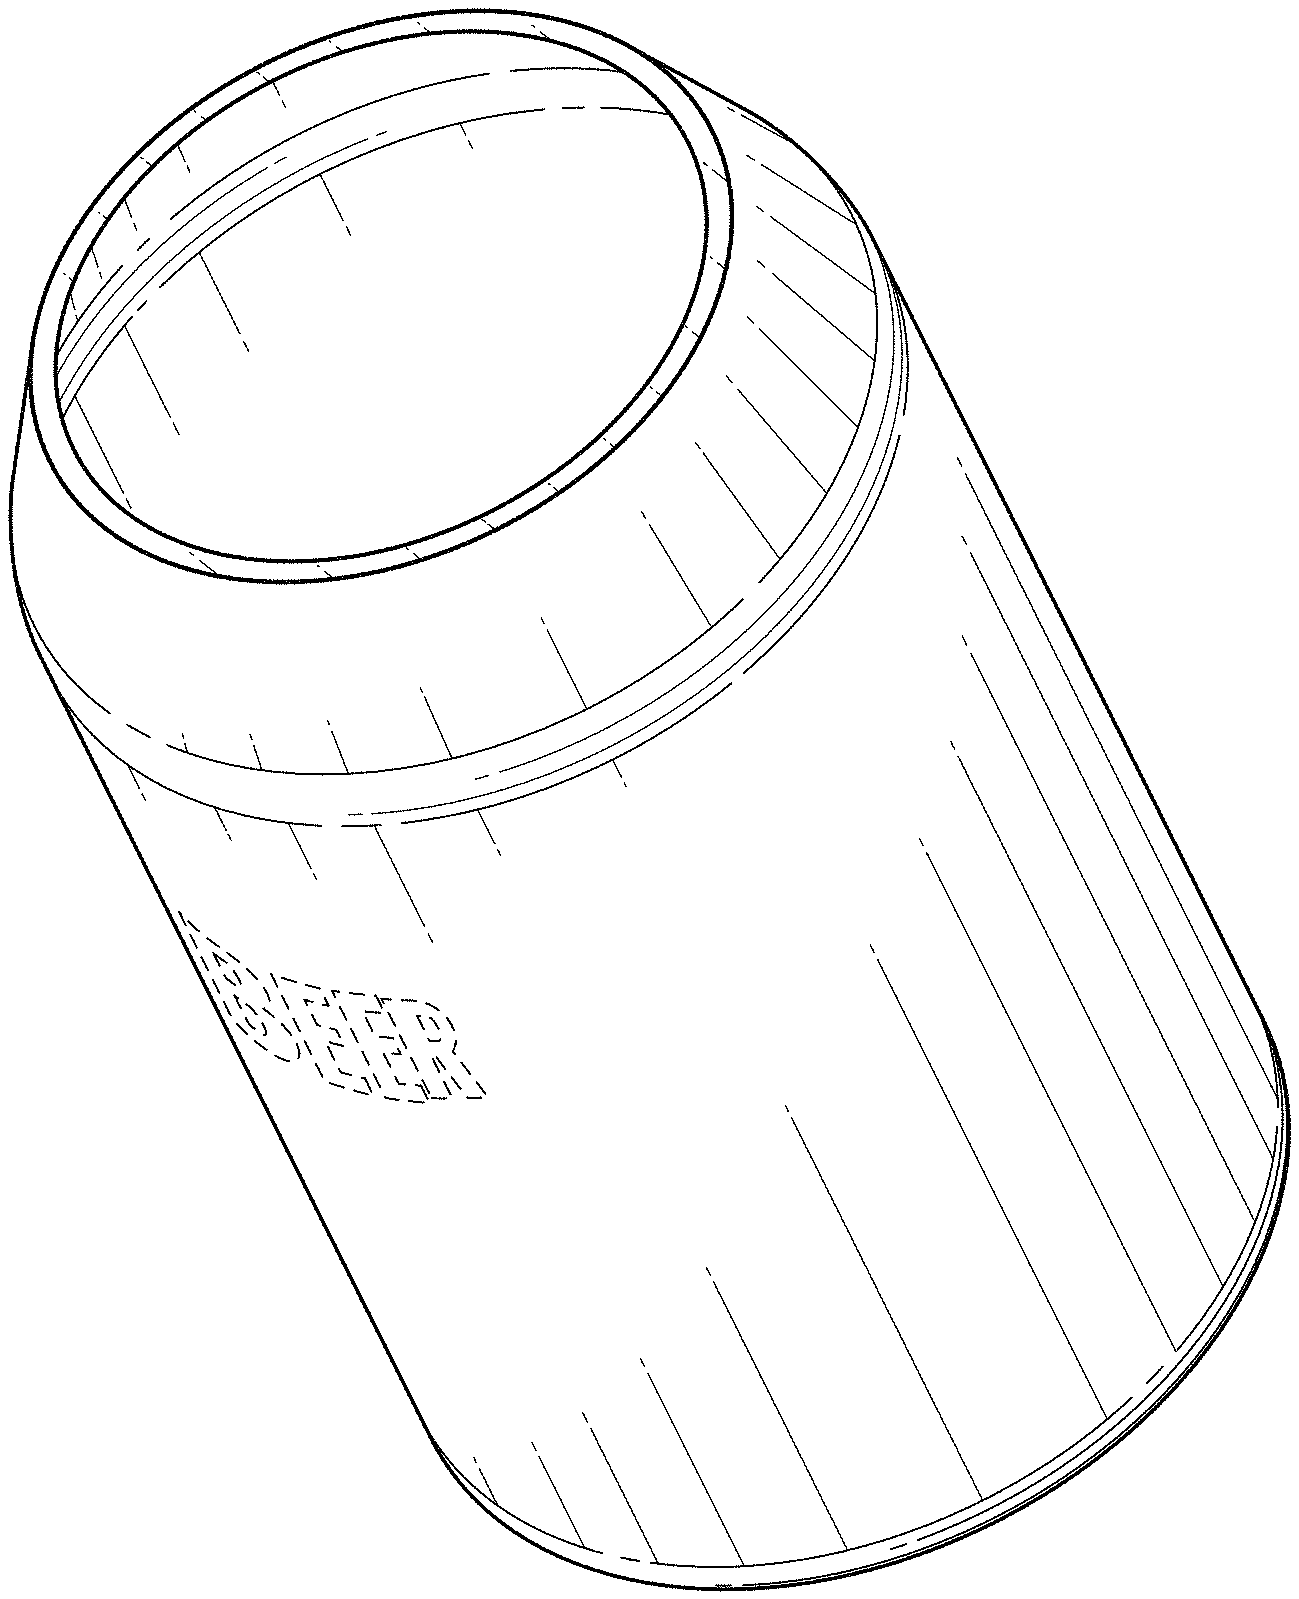 Tapered beverage container sleeve Patent Grant Laukala [BEERSY .]